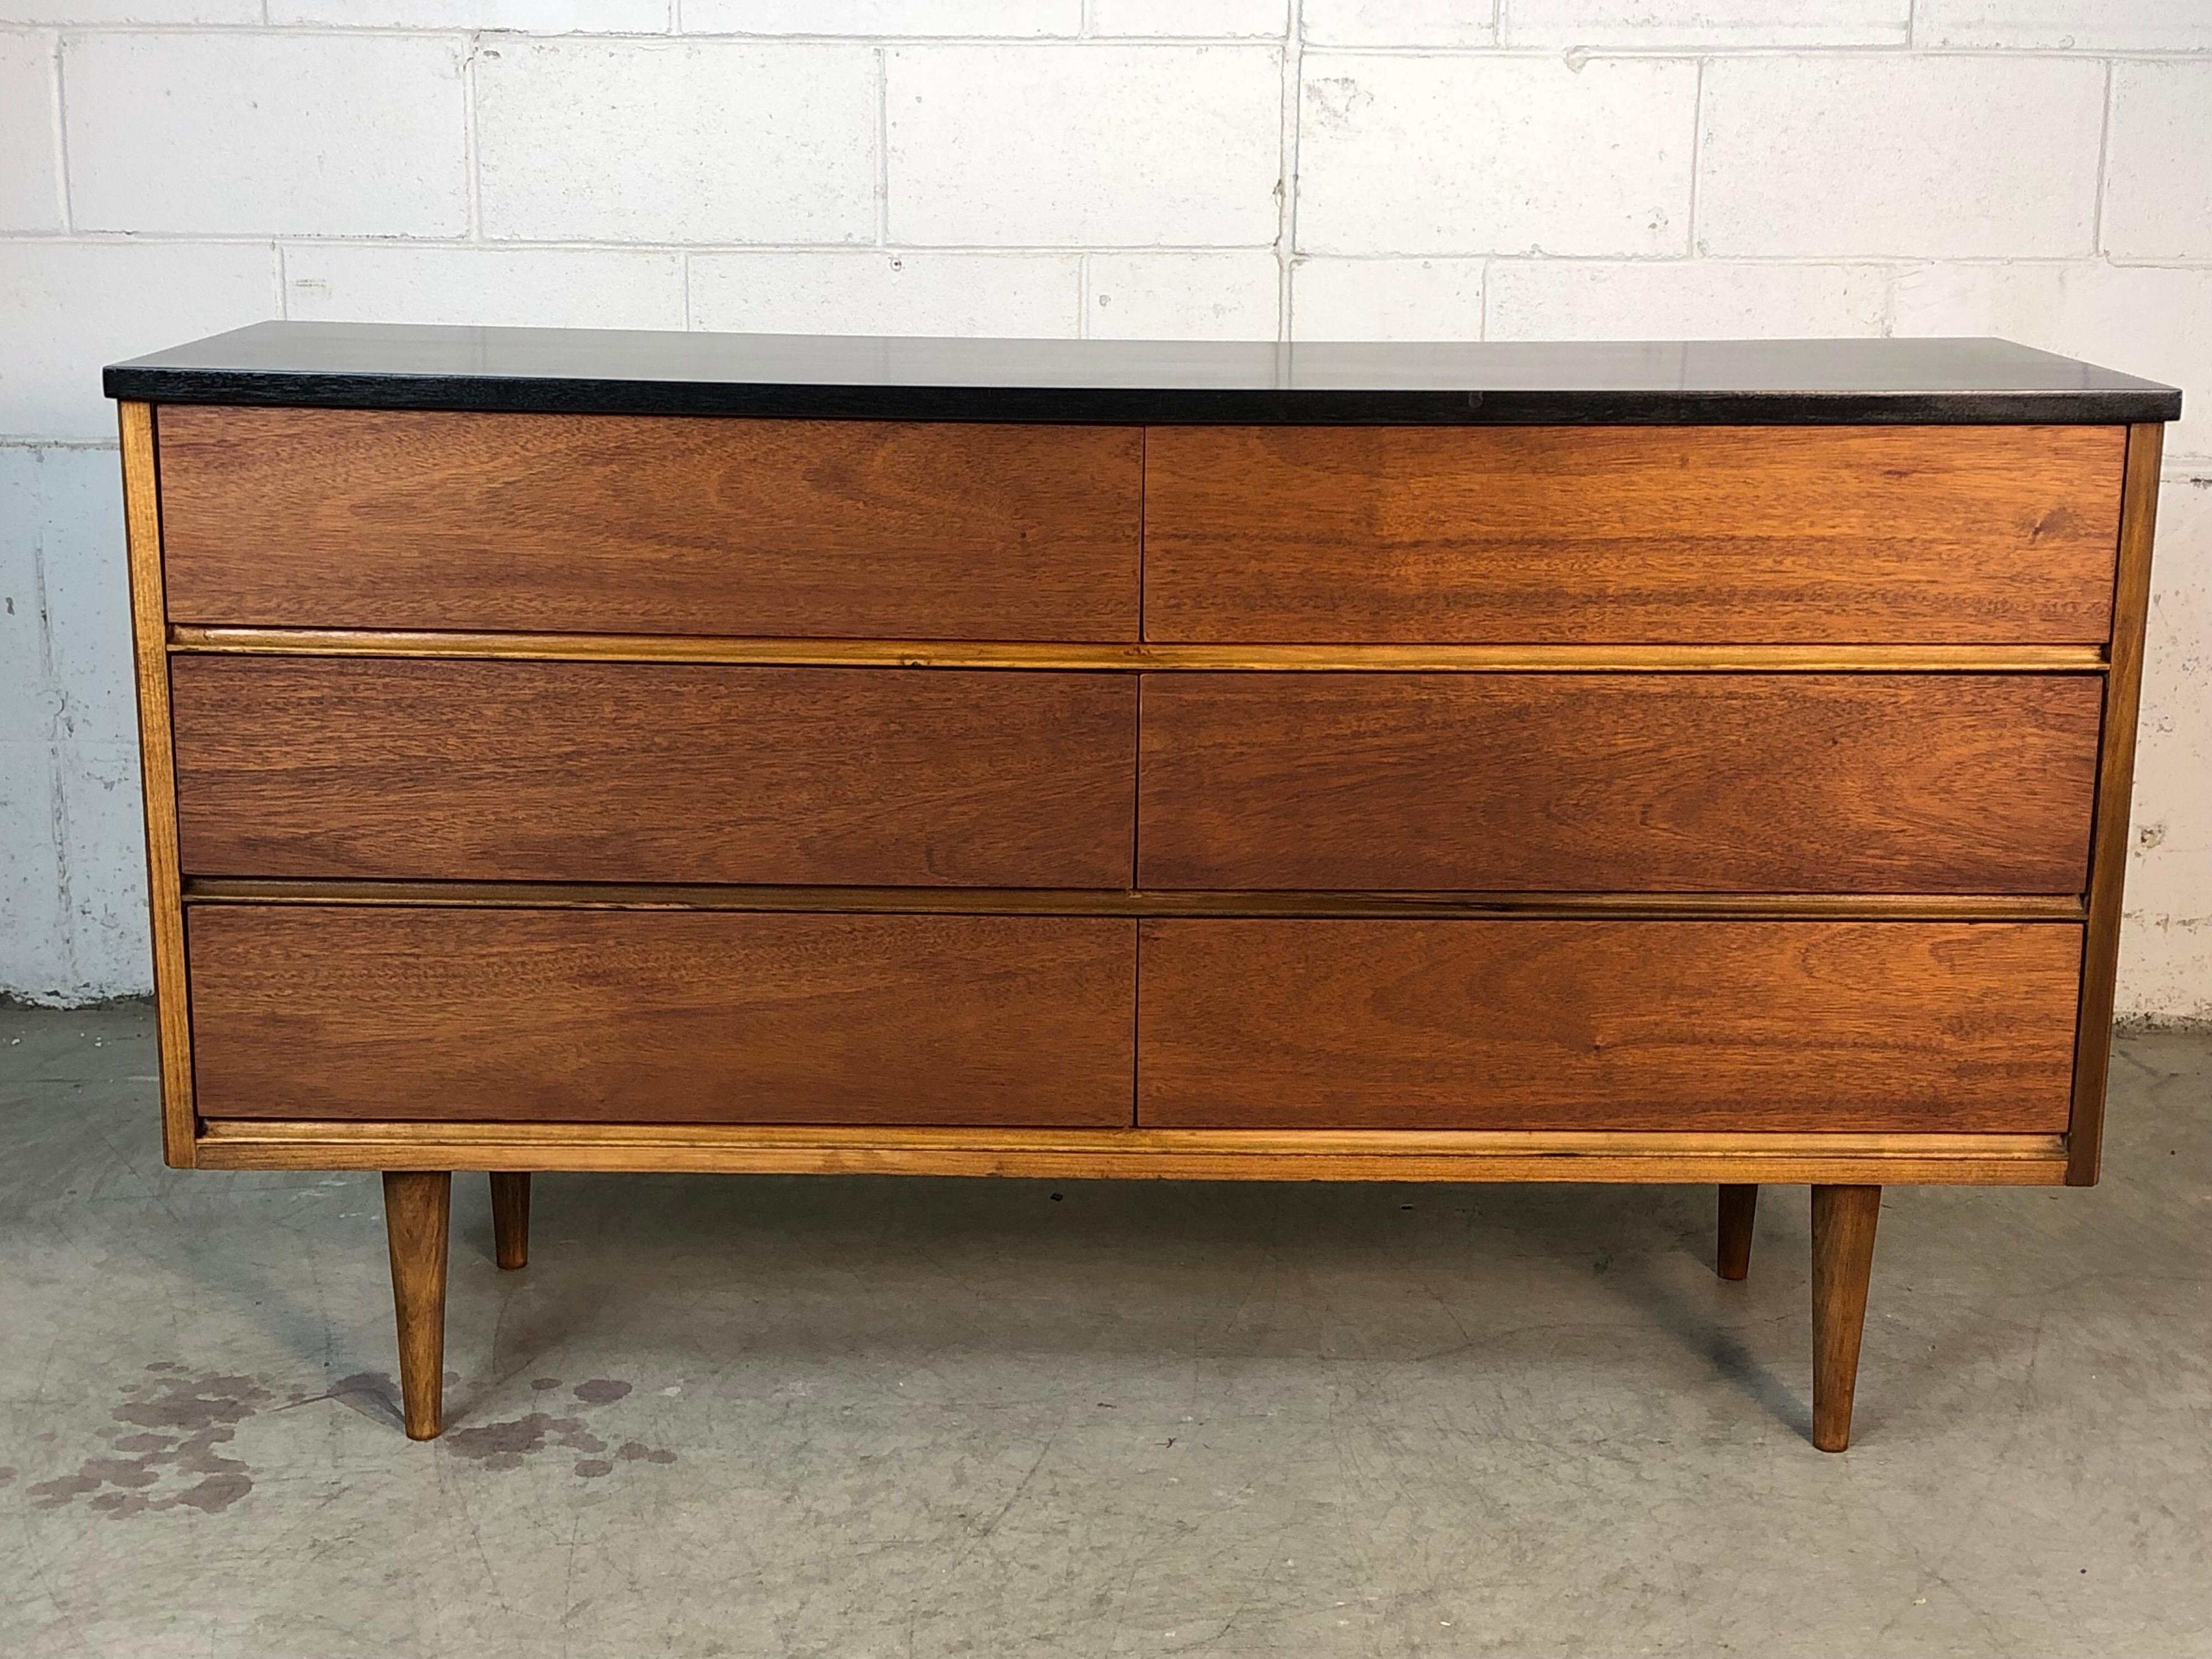 Vintage Mid-Century Modern 1960s walnut six drawer low dresser with a black painted top. The dresser has been recently refinished. There is some lighter ashwood that accents the dresser. The pulls are flush under the drawers and the legs are round.